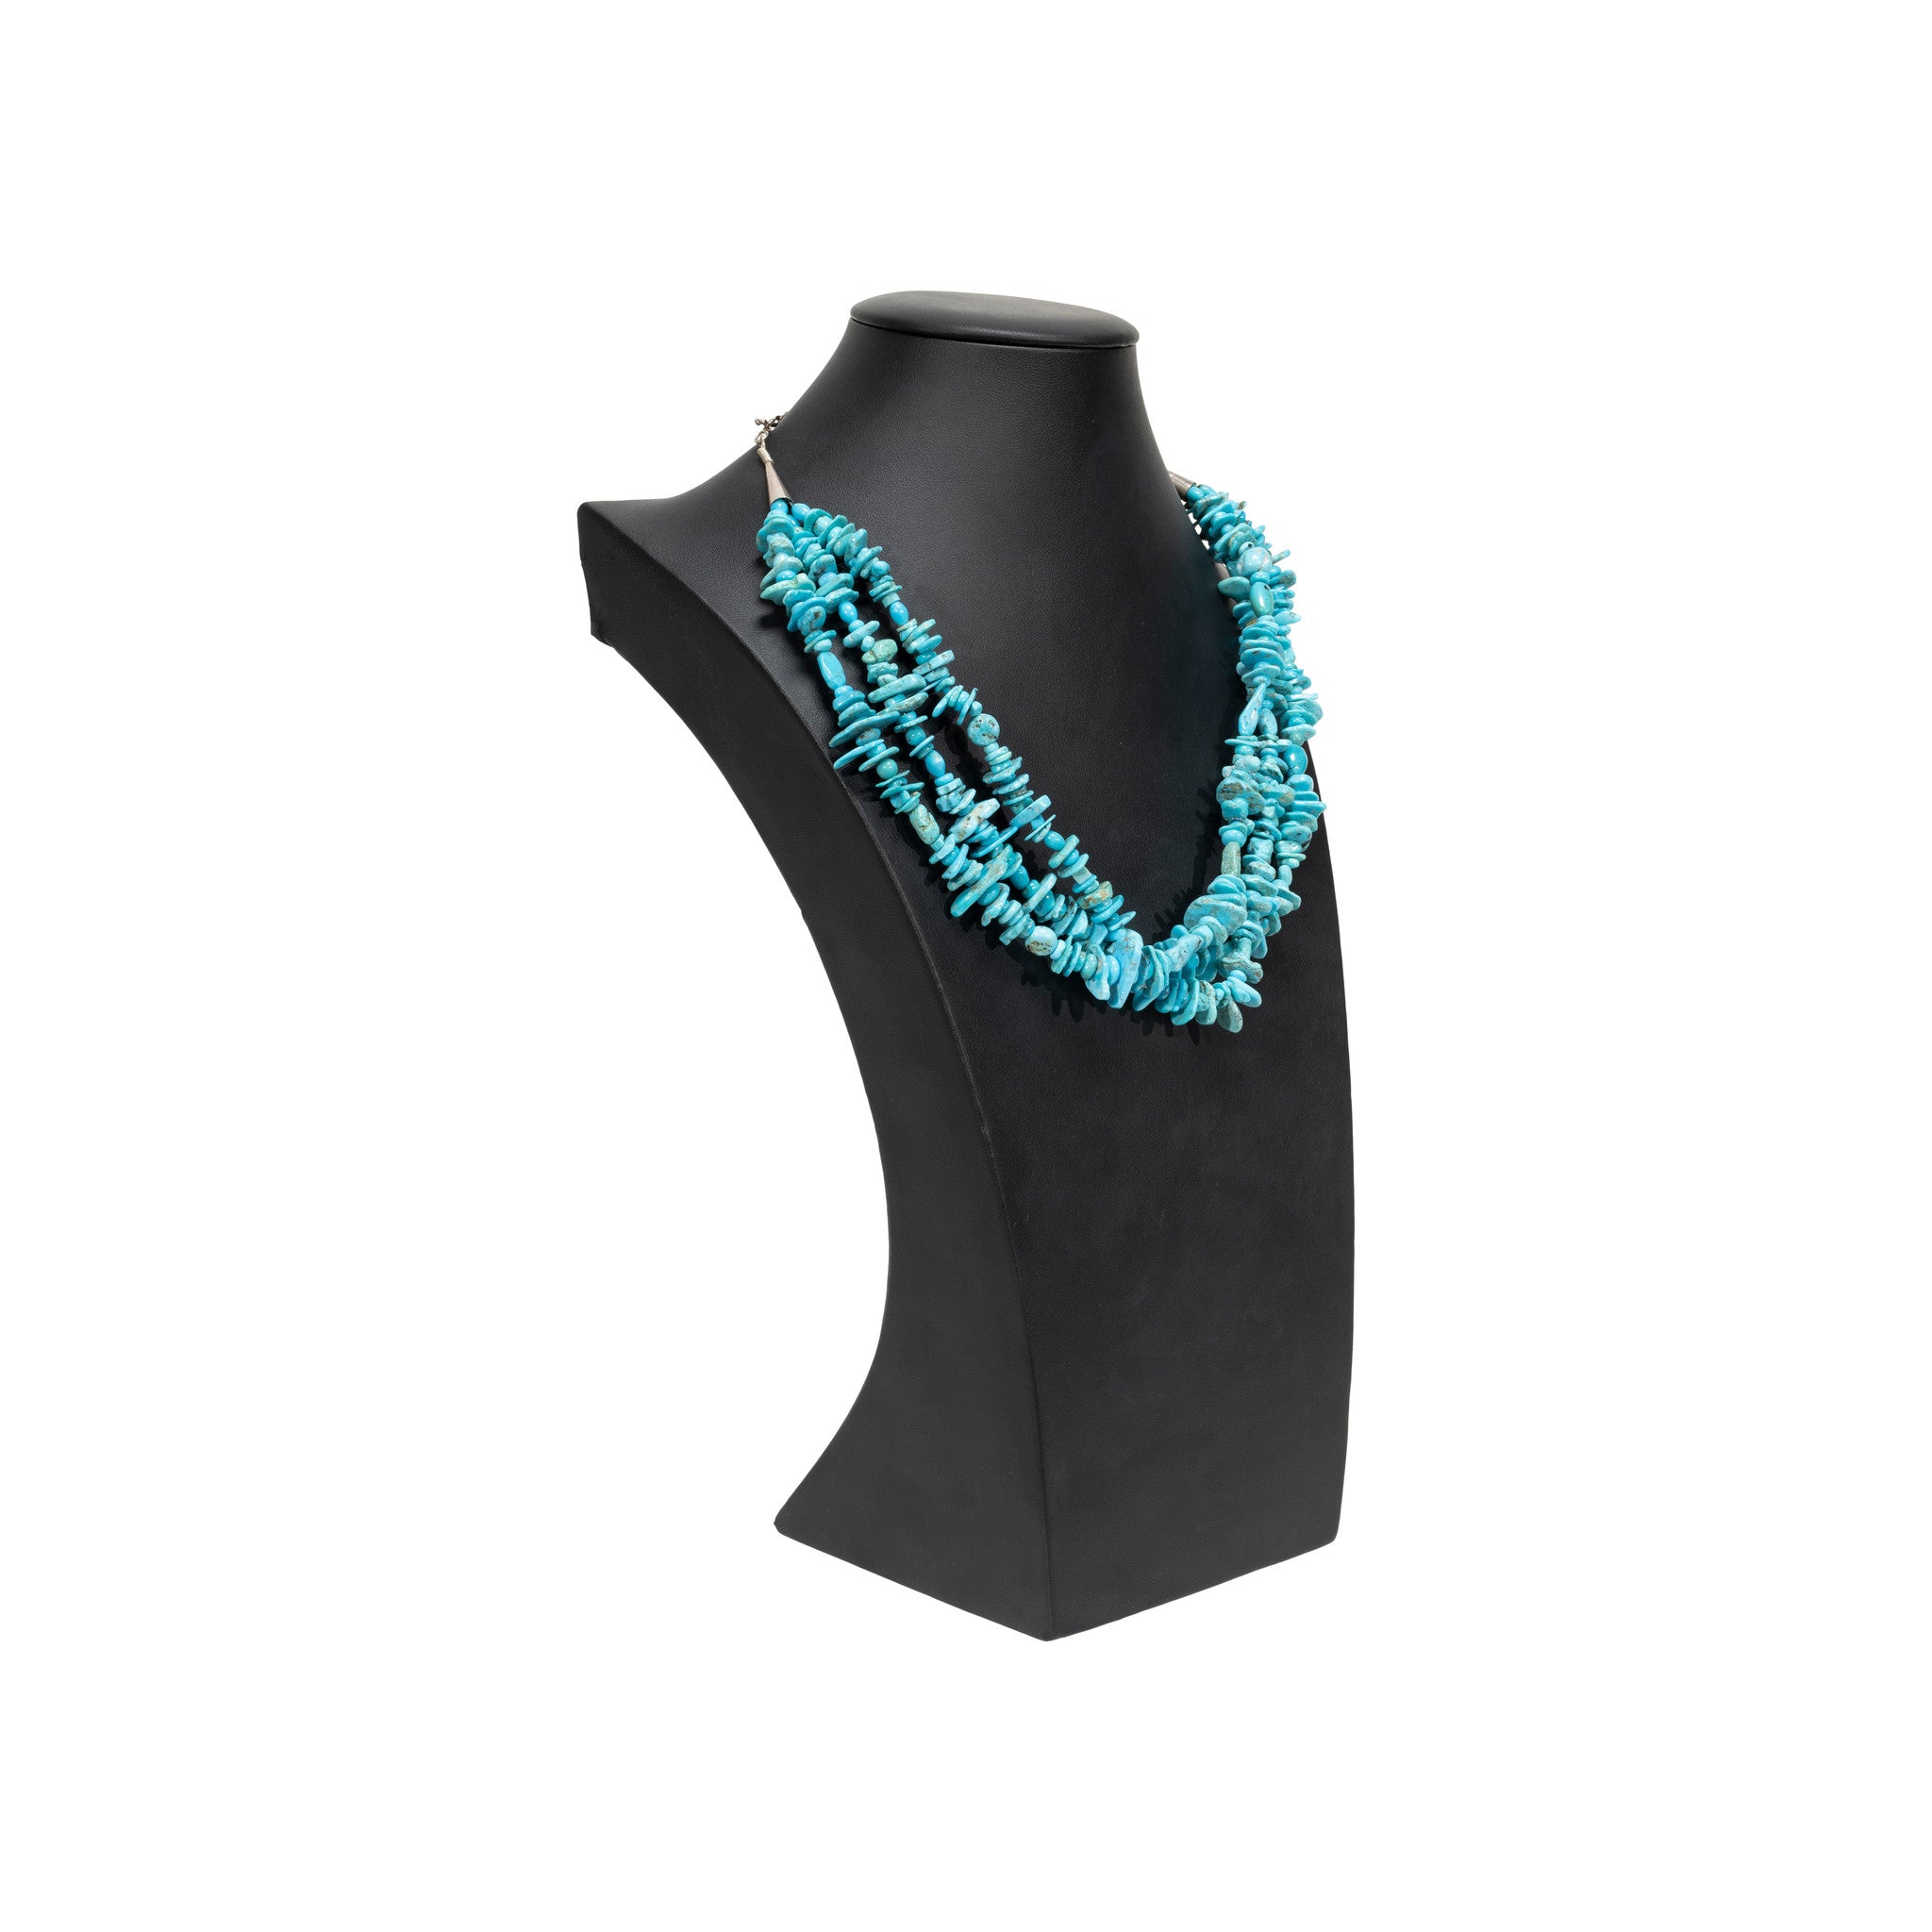 Navajo Beaded Turquoise Necklace